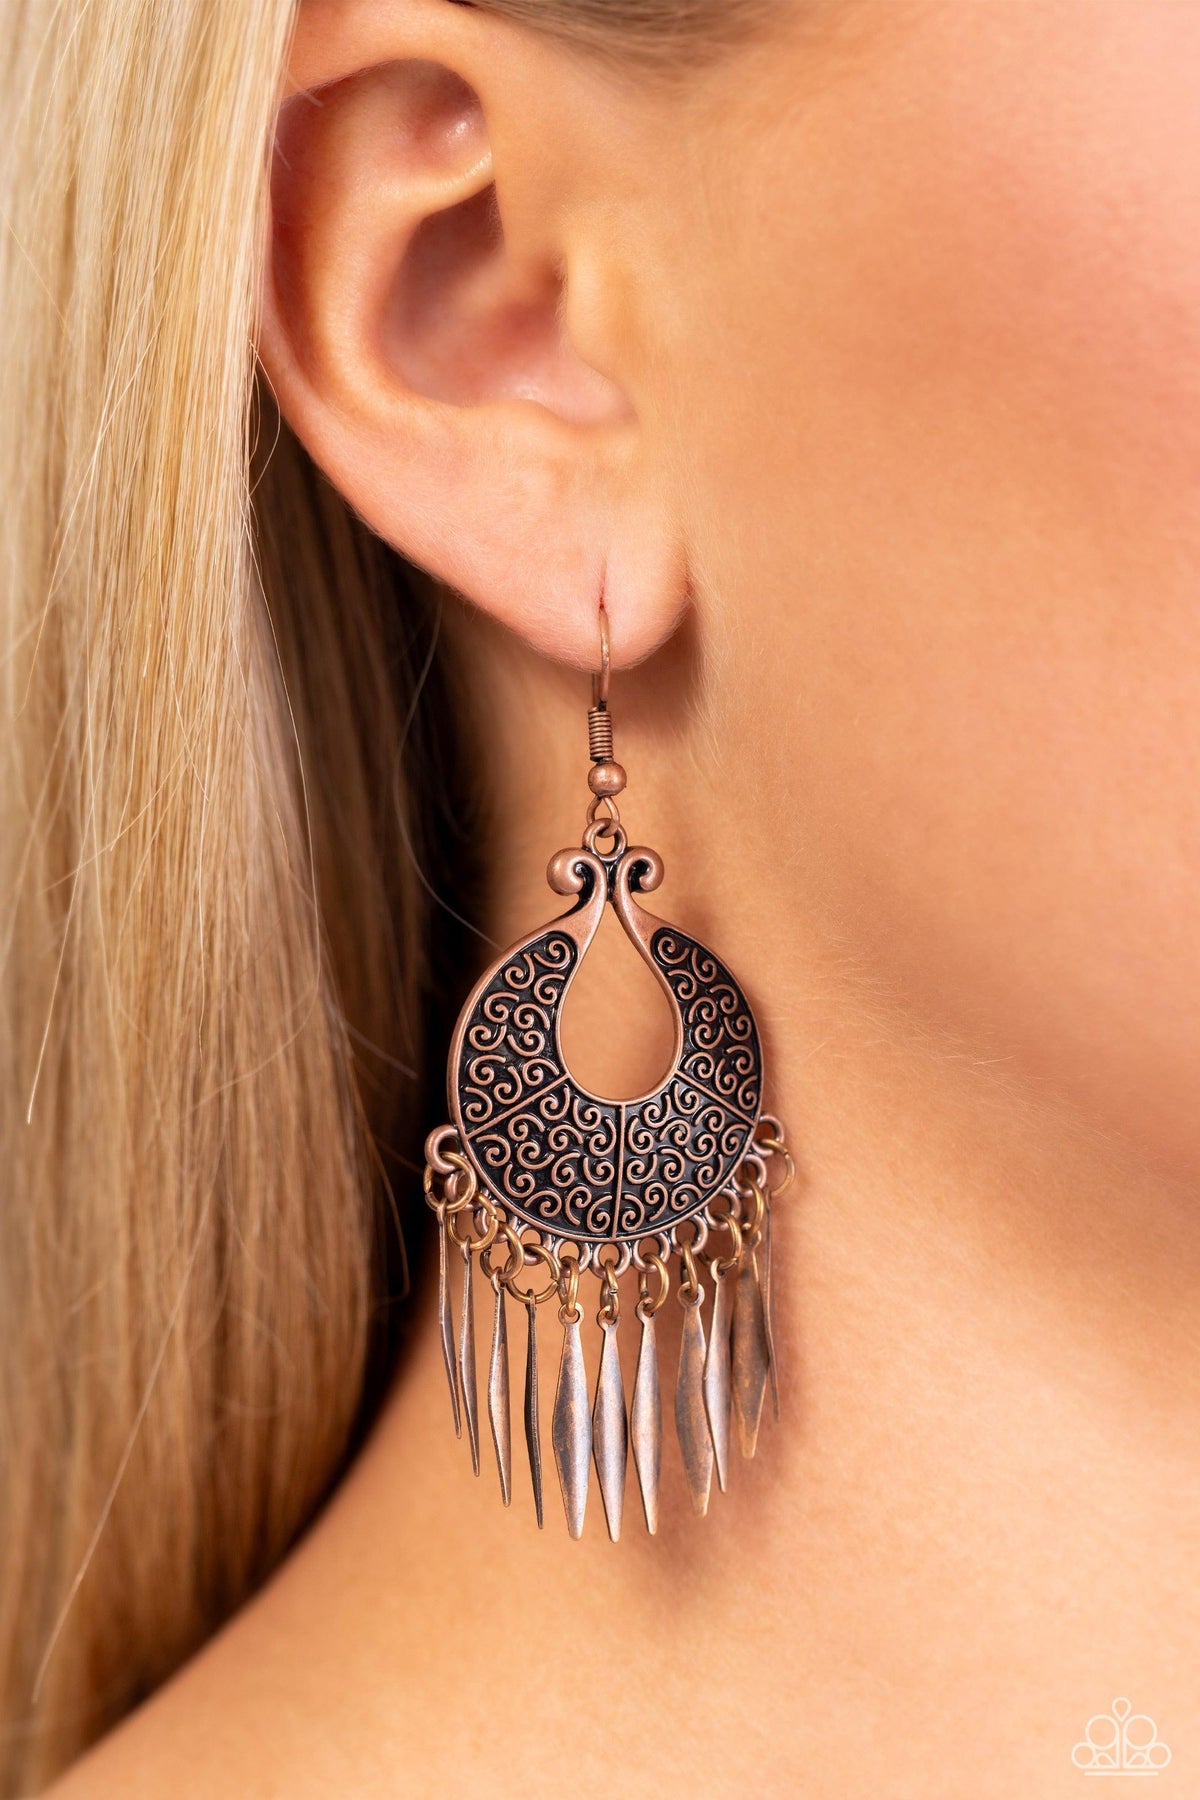 Tribal Charm Copper Earrings - Paparazzi Accessories-on model - CarasShop.com - $5 Jewelry by Cara Jewels